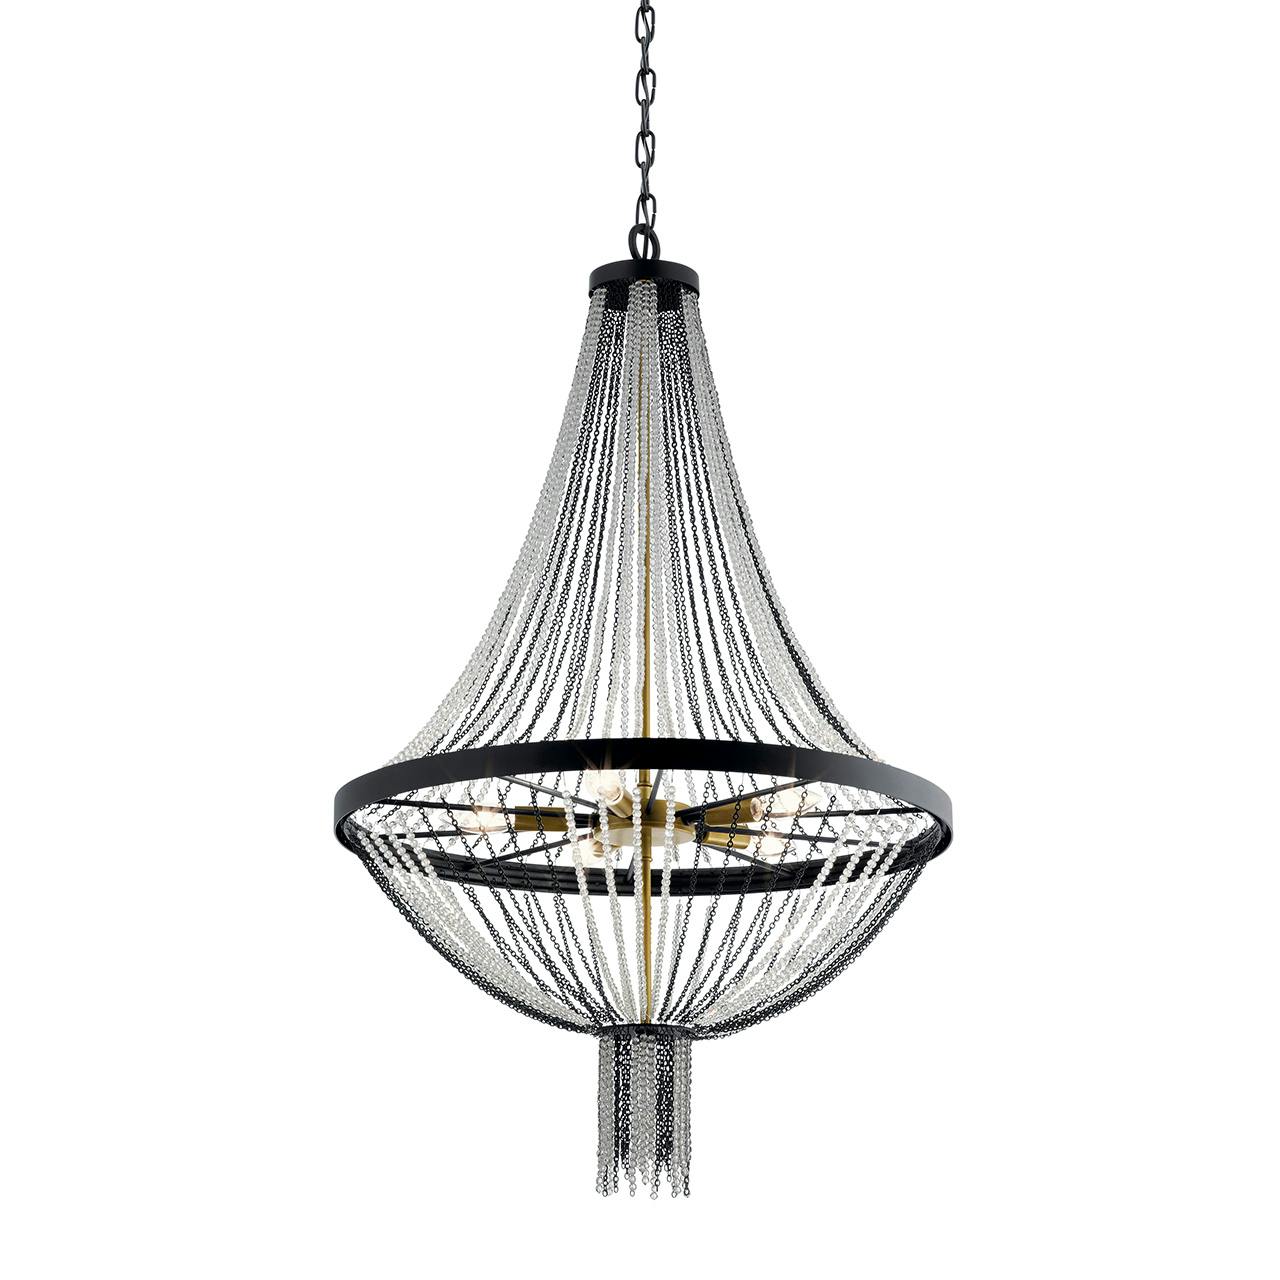 Alexia 39.5" Chandelier Textured Black without the canopy on a white background